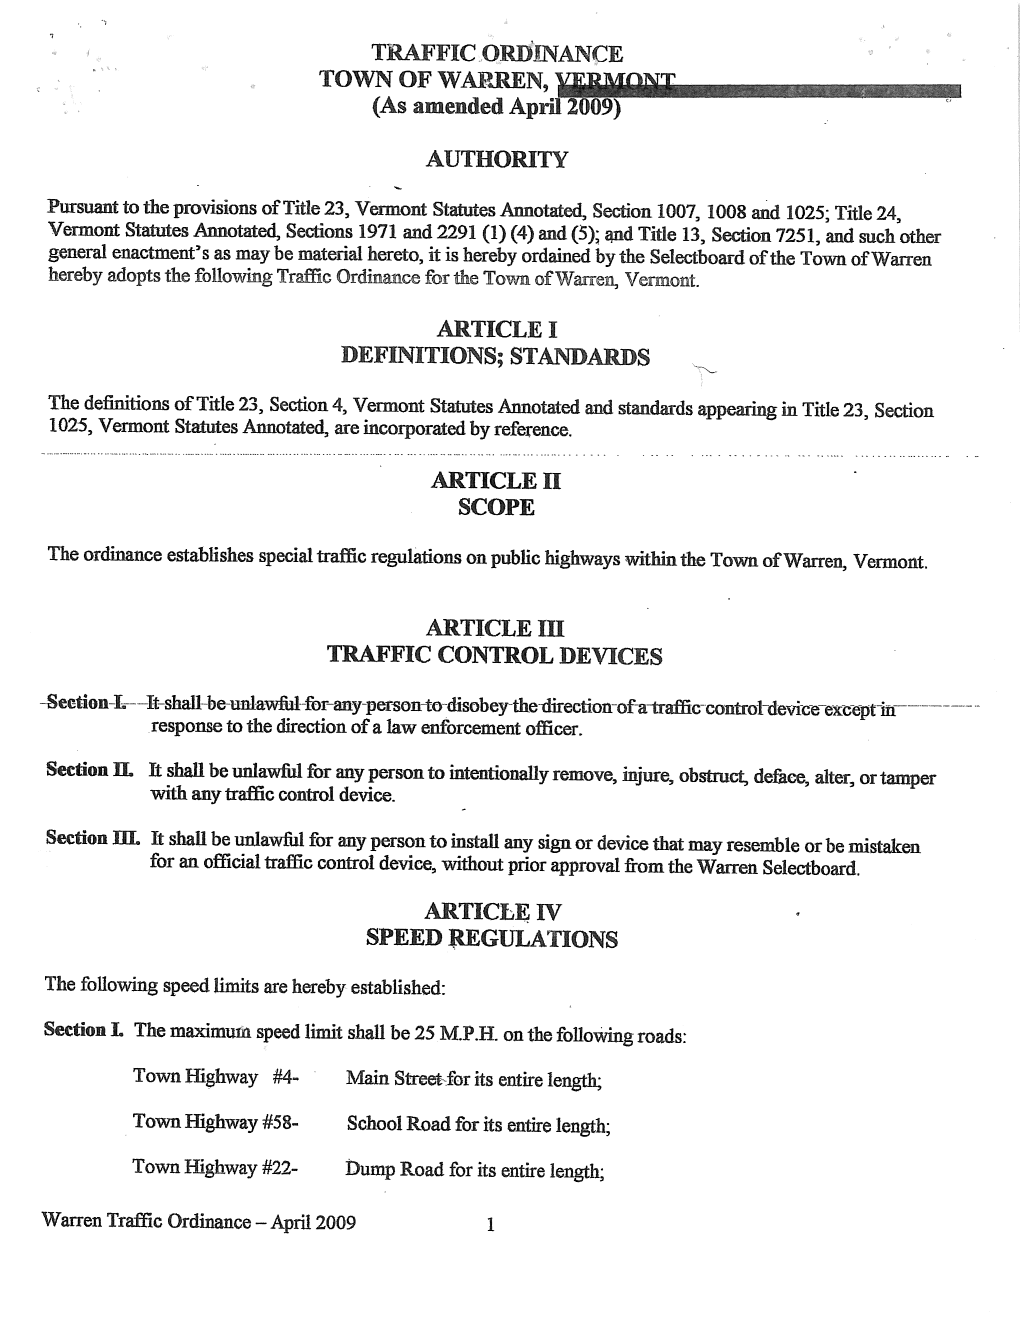 TRAFFIC ORDINANCE Authority ARTICLE I DEFINITIONS